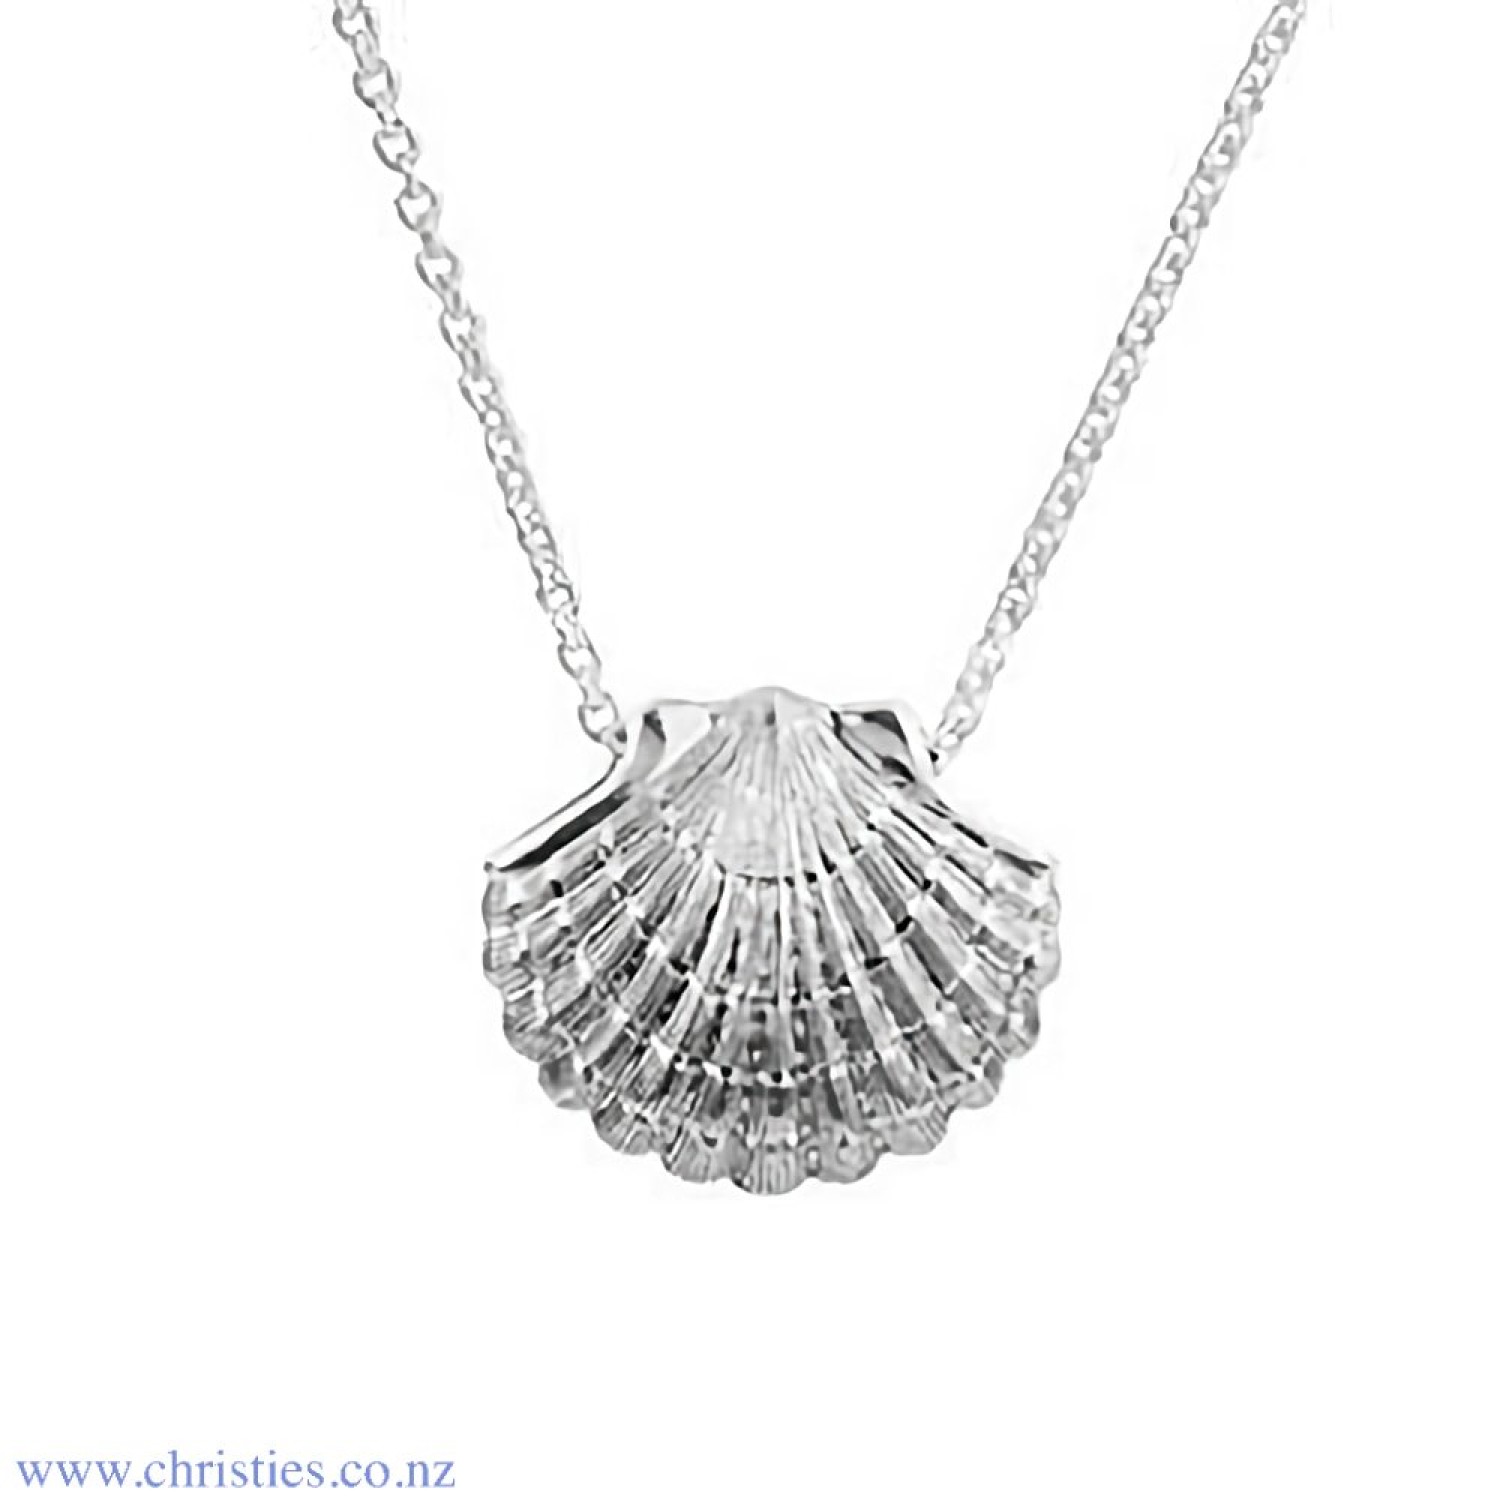 2P61011 Evolve Ocean Scallop Pendant. Evolves exquisite Ocean Scallop Pendant, with its instantly recognisable shape, gives us the direction to ﬁnd our way. The striking lines on the shell are believed to lead us on the right path, navigating us to ﬁnd ou